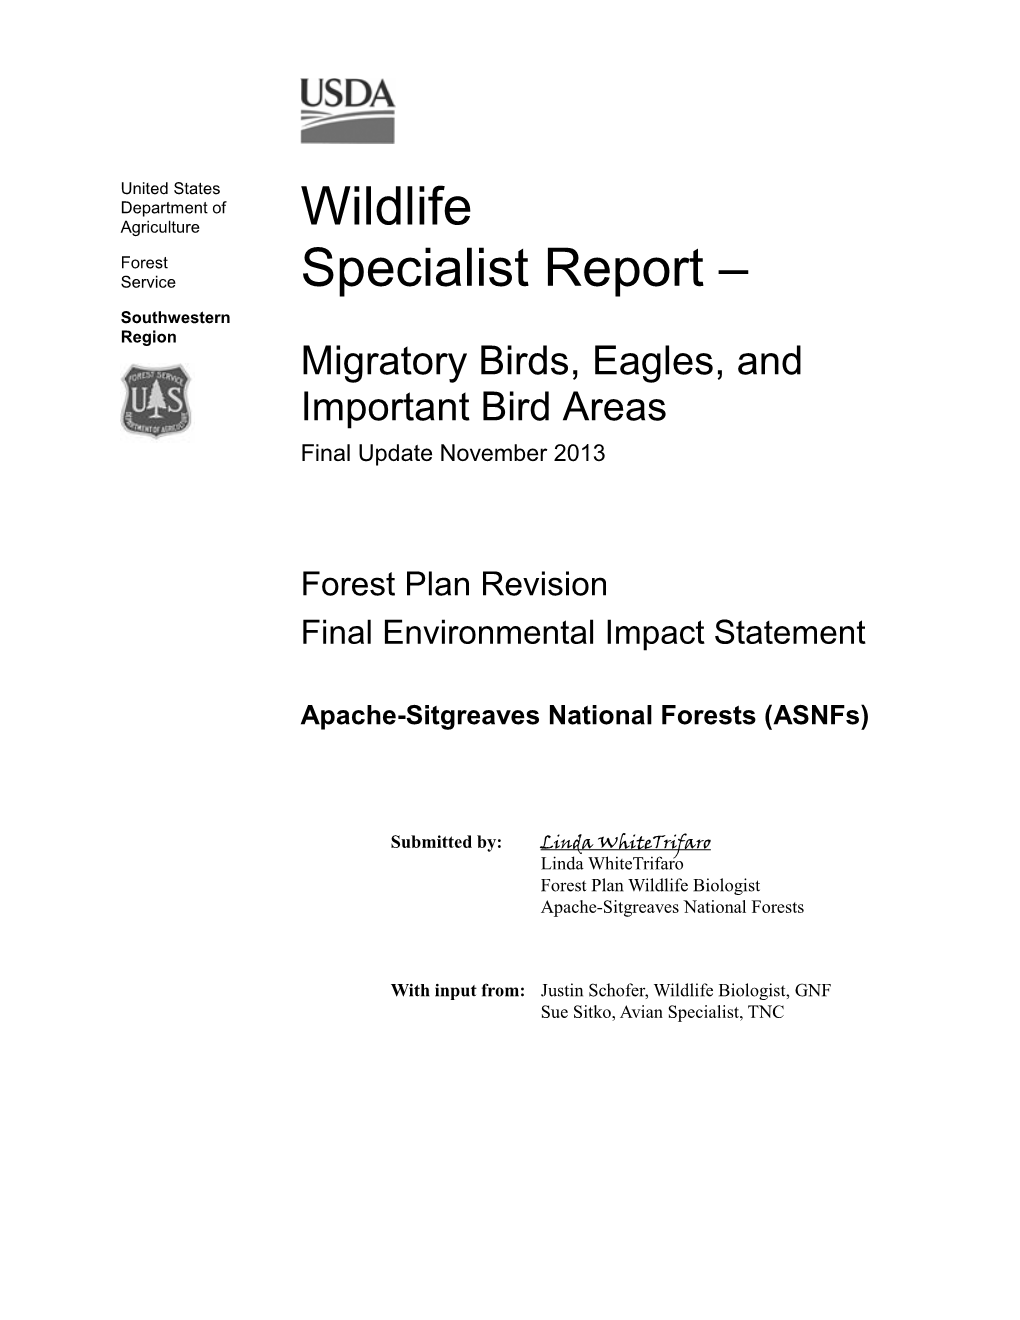 Migratory Birds, Eagles, and Important Bird Areas Final Update November 2013